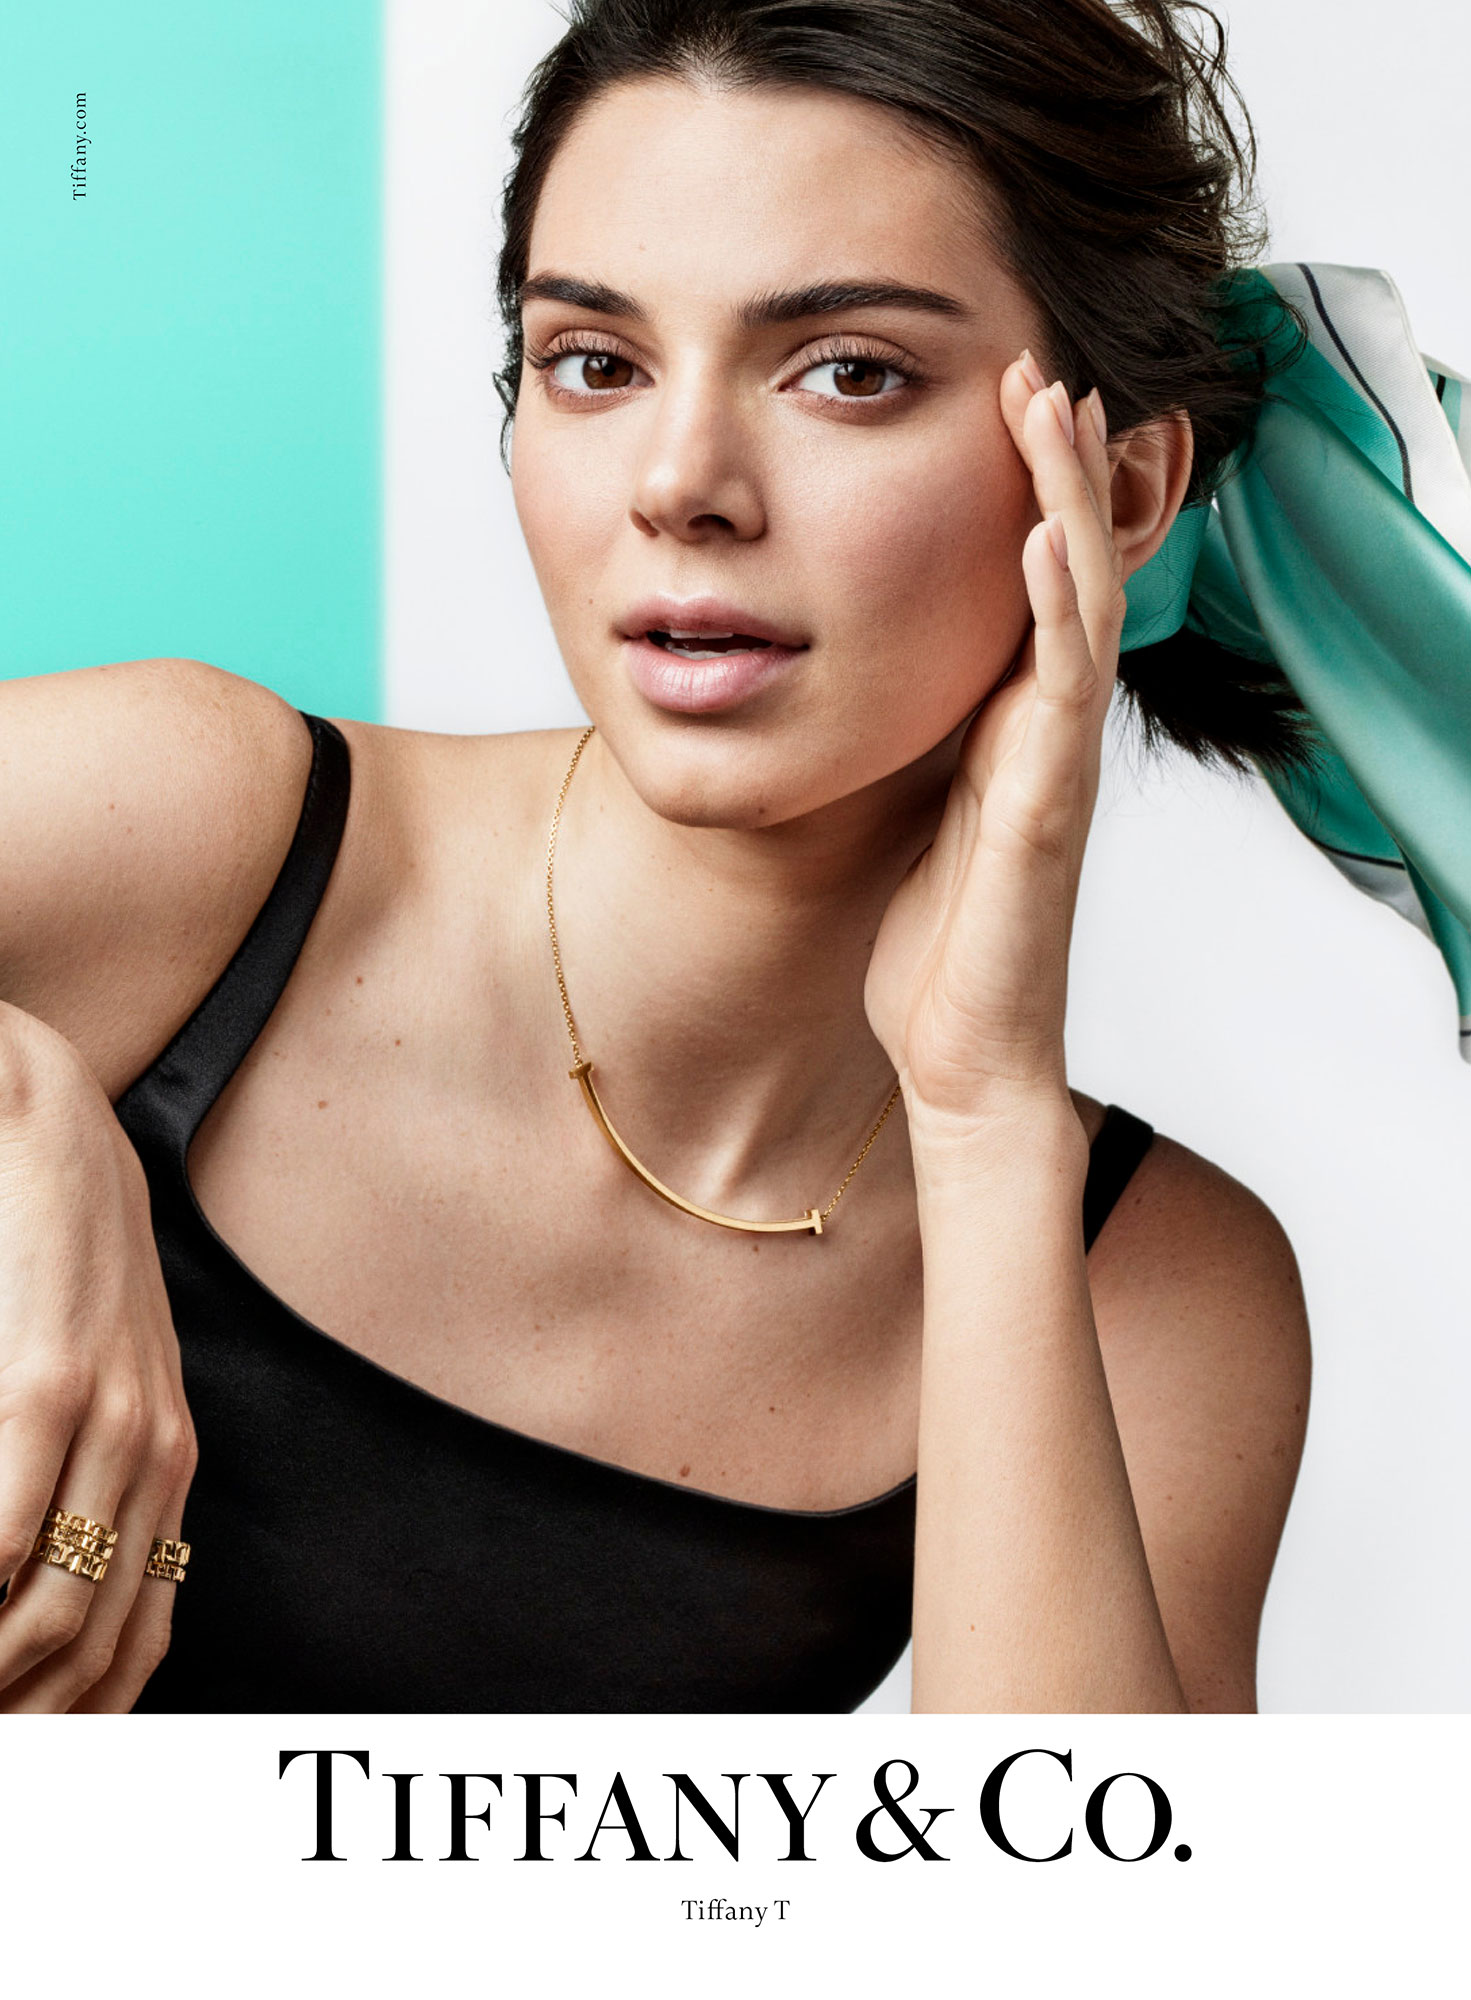 kendall jenner tiffany and co